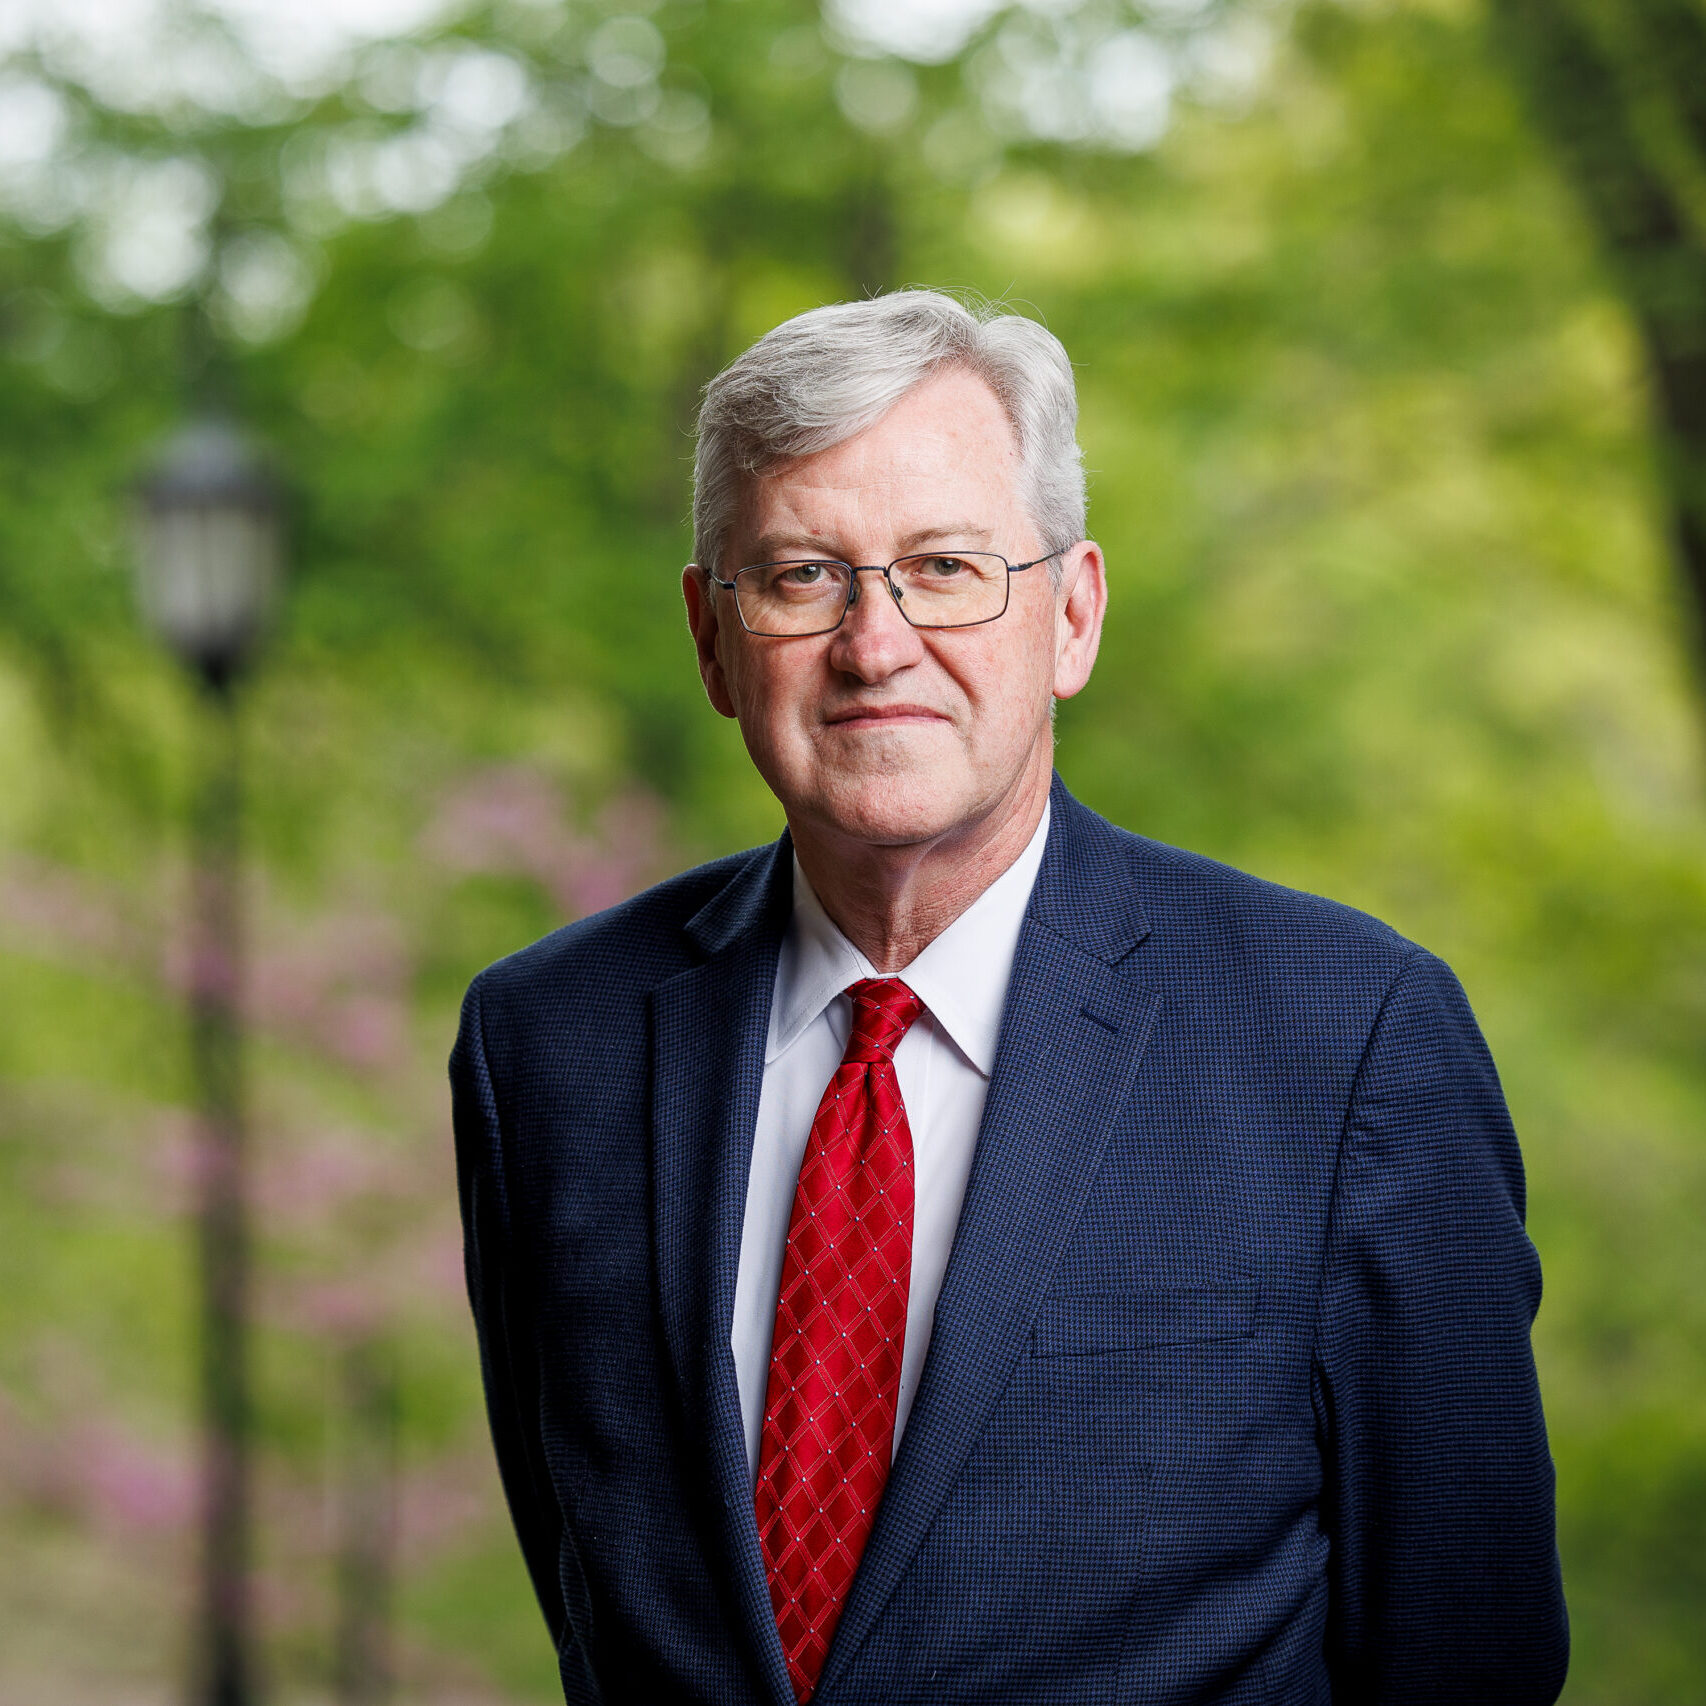 photo of white-haired man wearing blue suit and red tie against out of focus trees